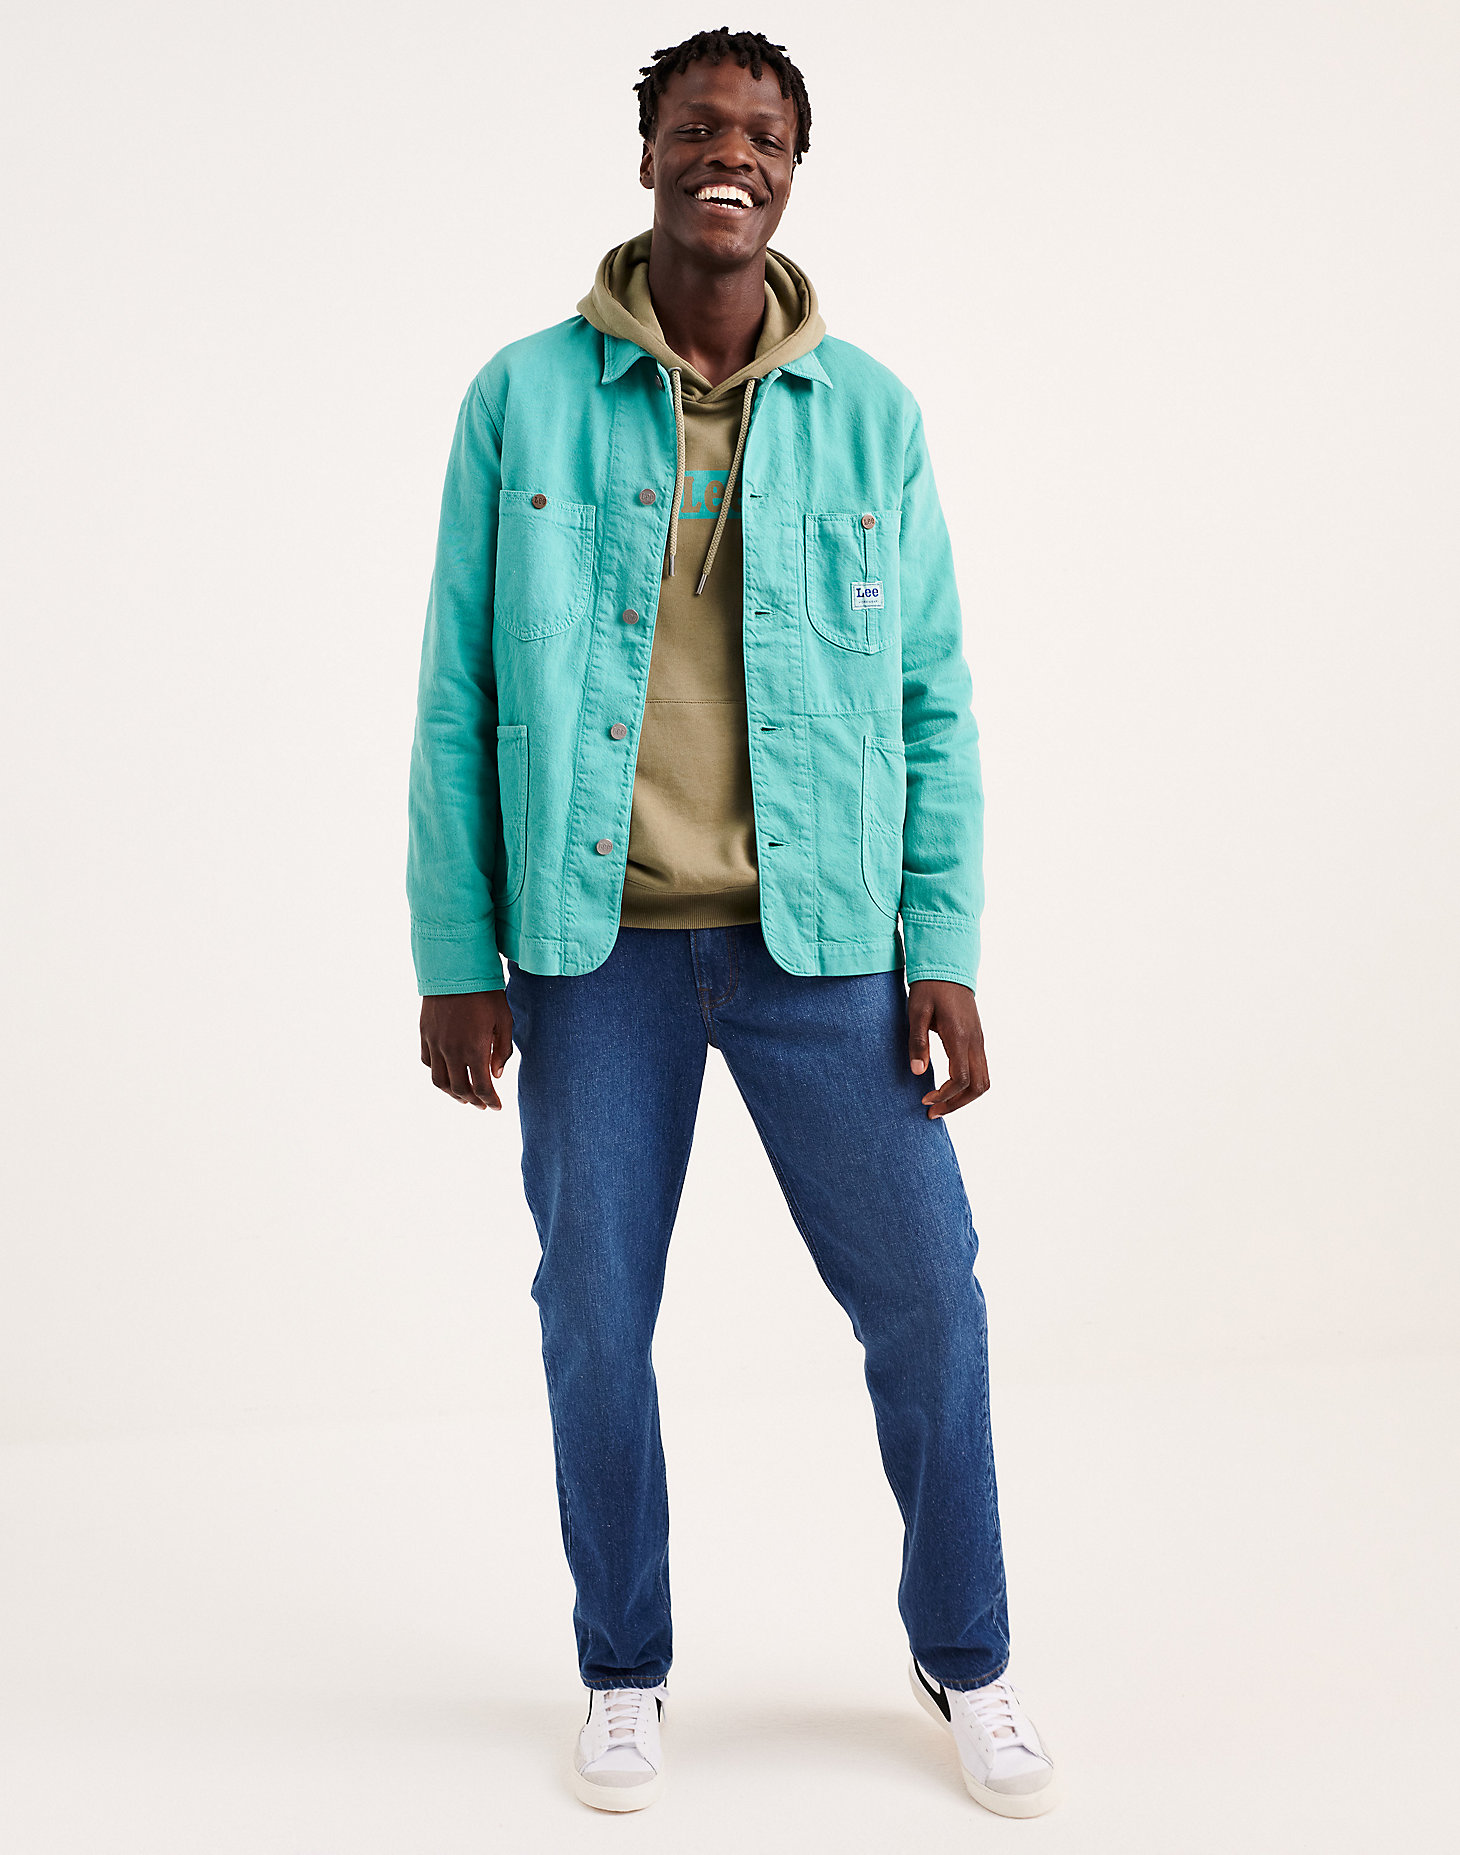 Loco Jacket in Teal Wash main view